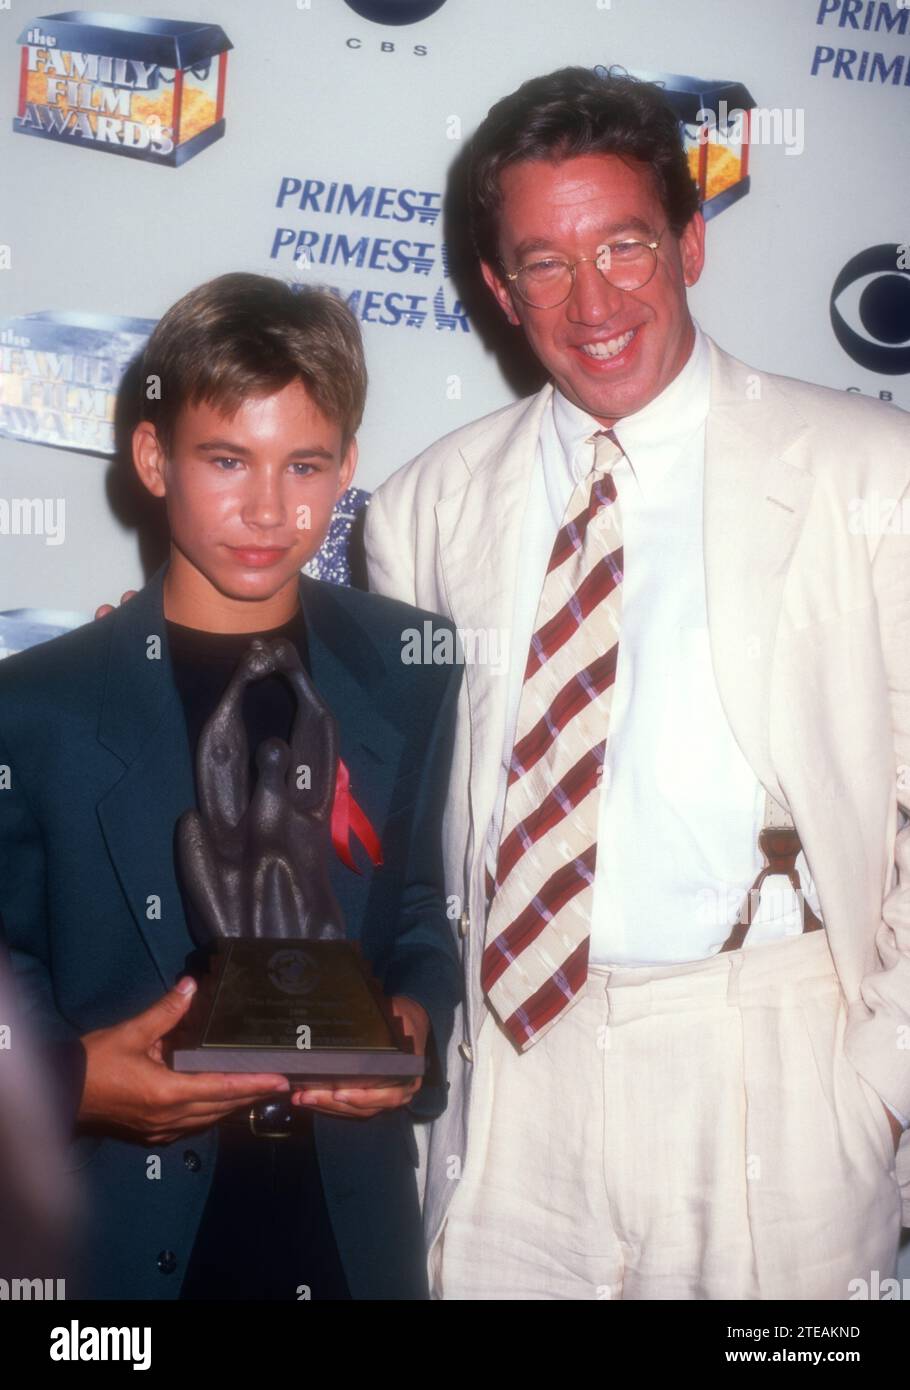 Los Angeles, California, USA 22nd August 1996 Actor Jonathan Taylor Thomas and Actor Tim Allen attend the World Film InstituteÕs Family Film Awards at CBS Television City on August 22, 1996 in Los Angeles, California, USA. Photo by Barry King/Alamy Stock Photo Stock Photo